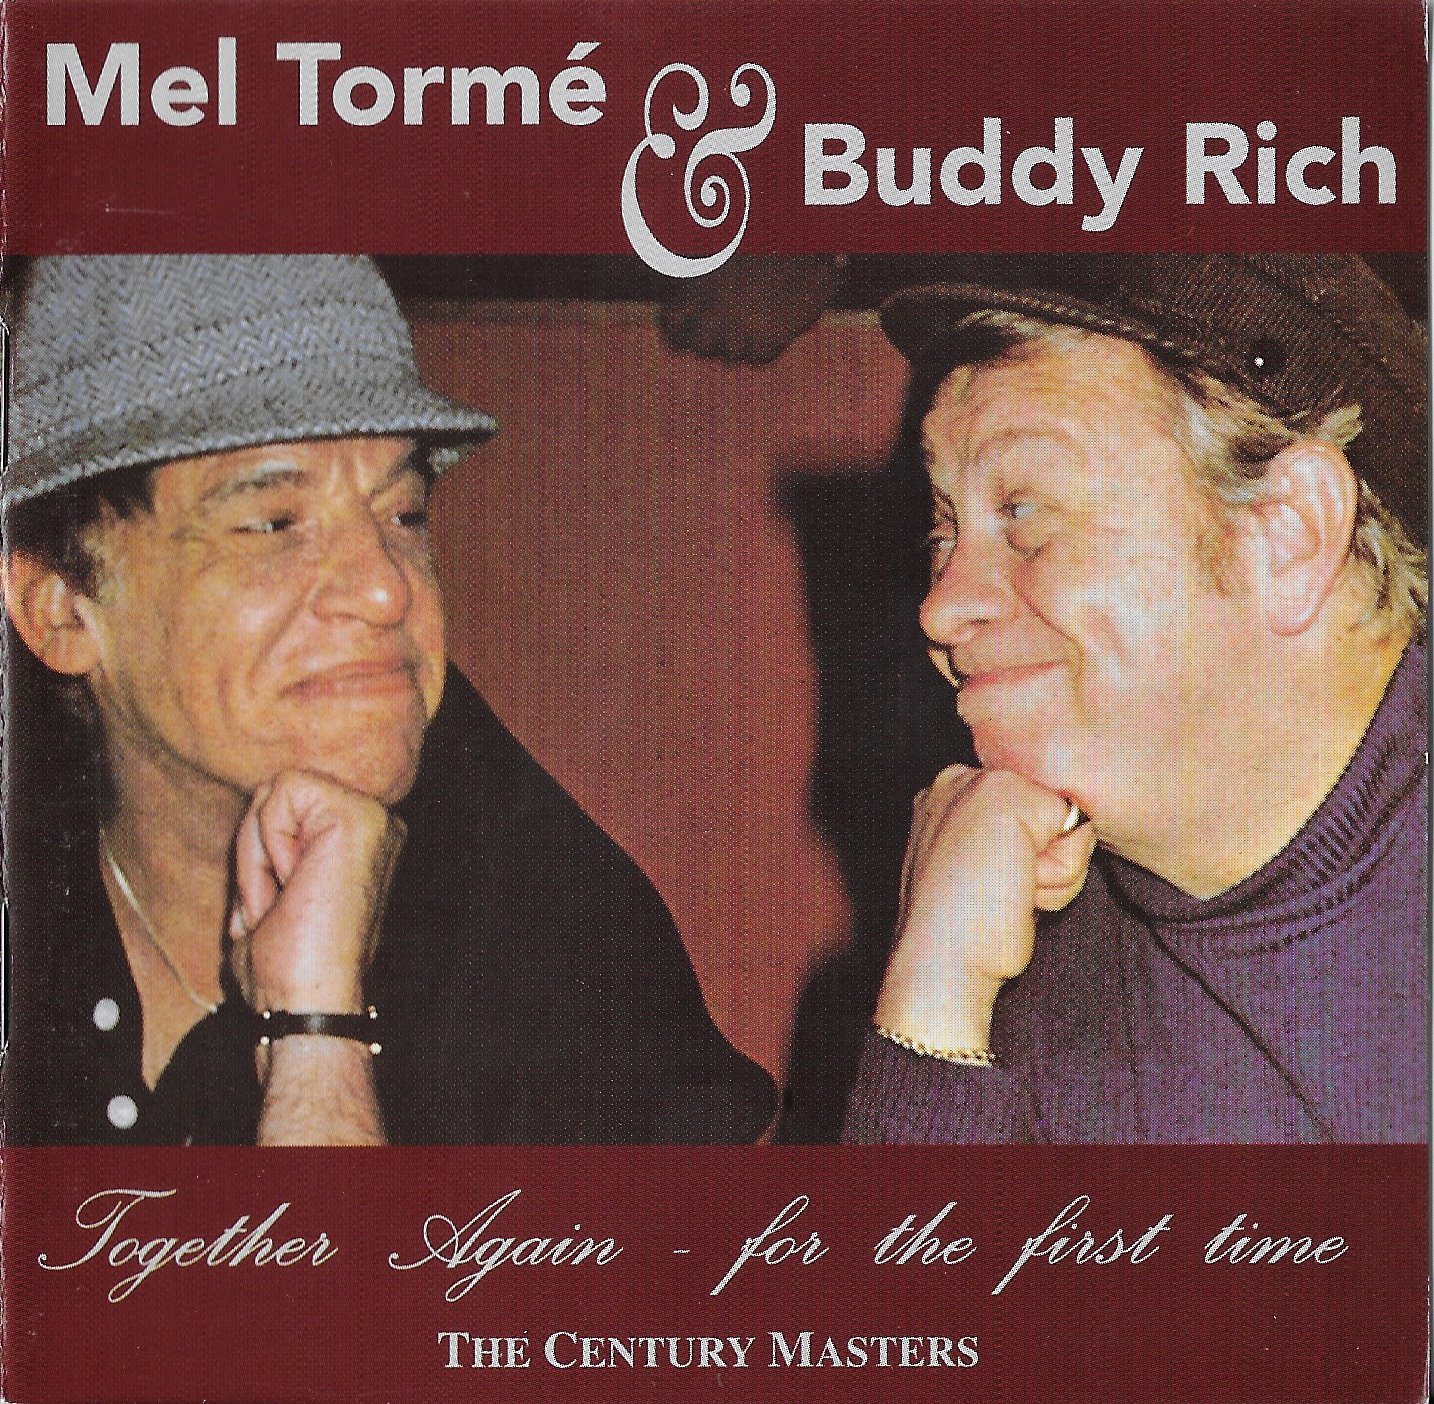 Picture of The Century Catalogue - Together again for the first time by artist Mel Torme / Buddy Rich from the BBC cds - Records and Tapes library